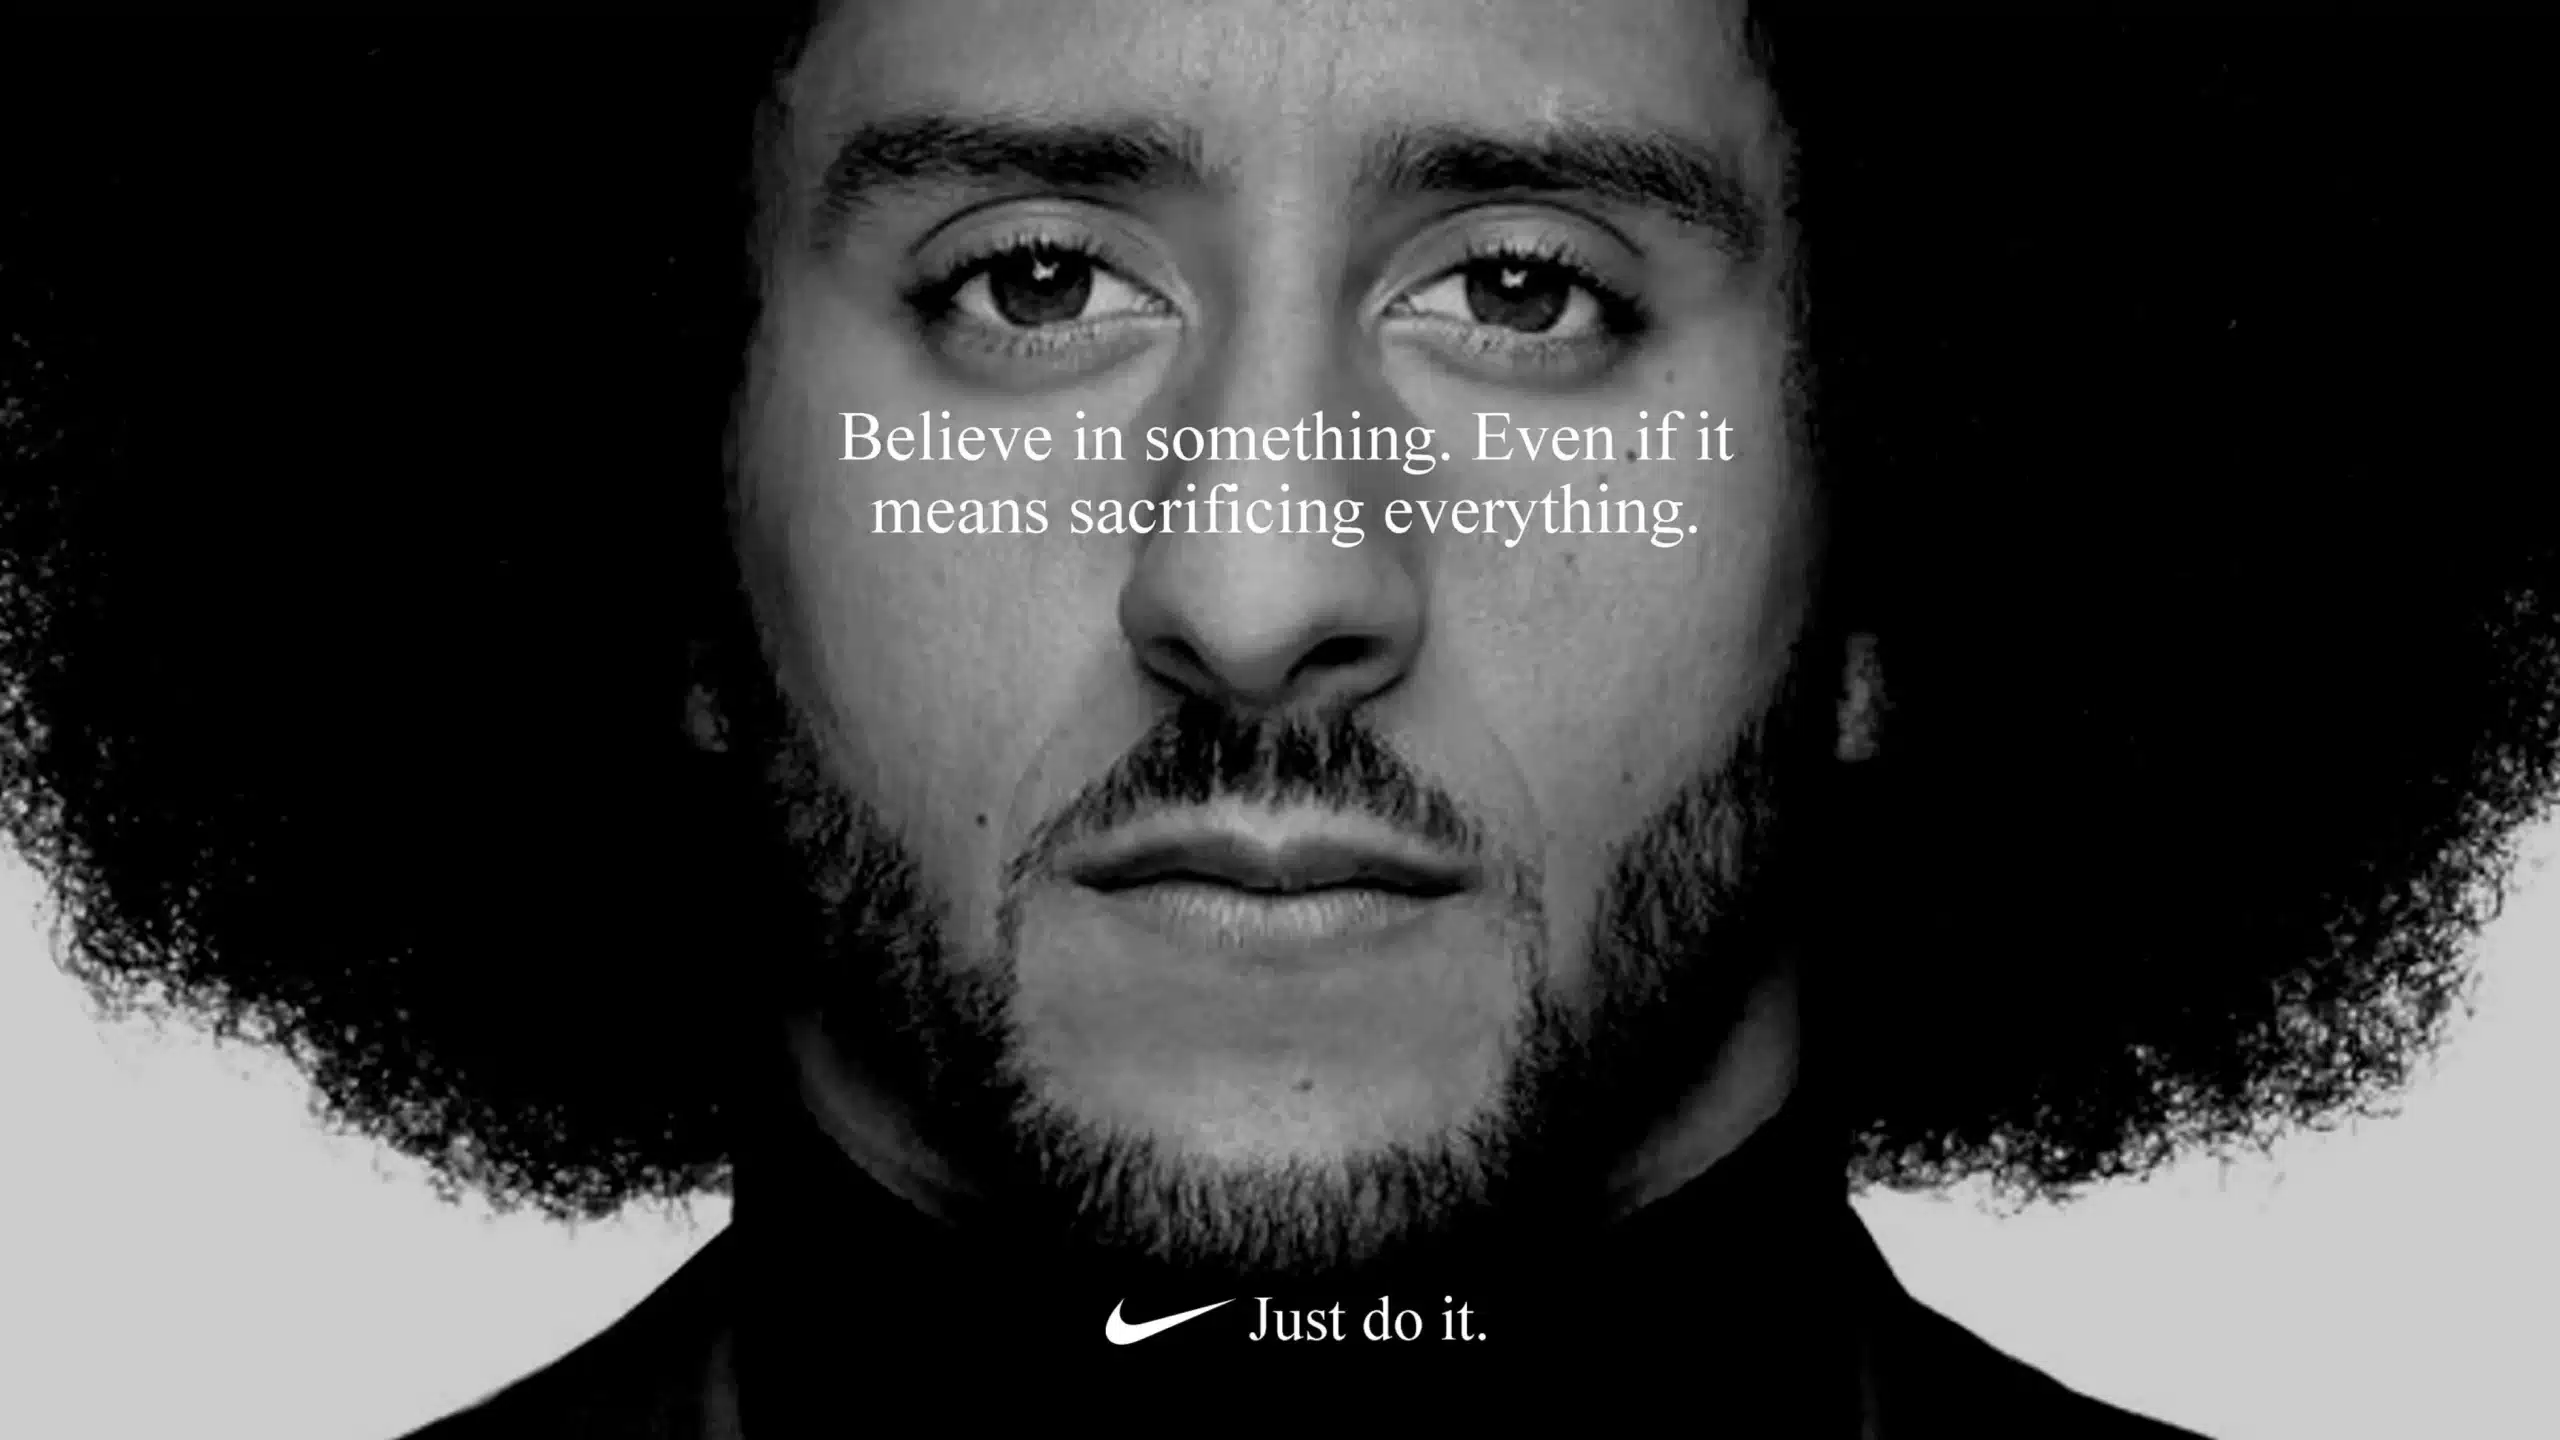 Storytelling in Marketing, Colin Kaepernick in Nike Campaign's Just Do It